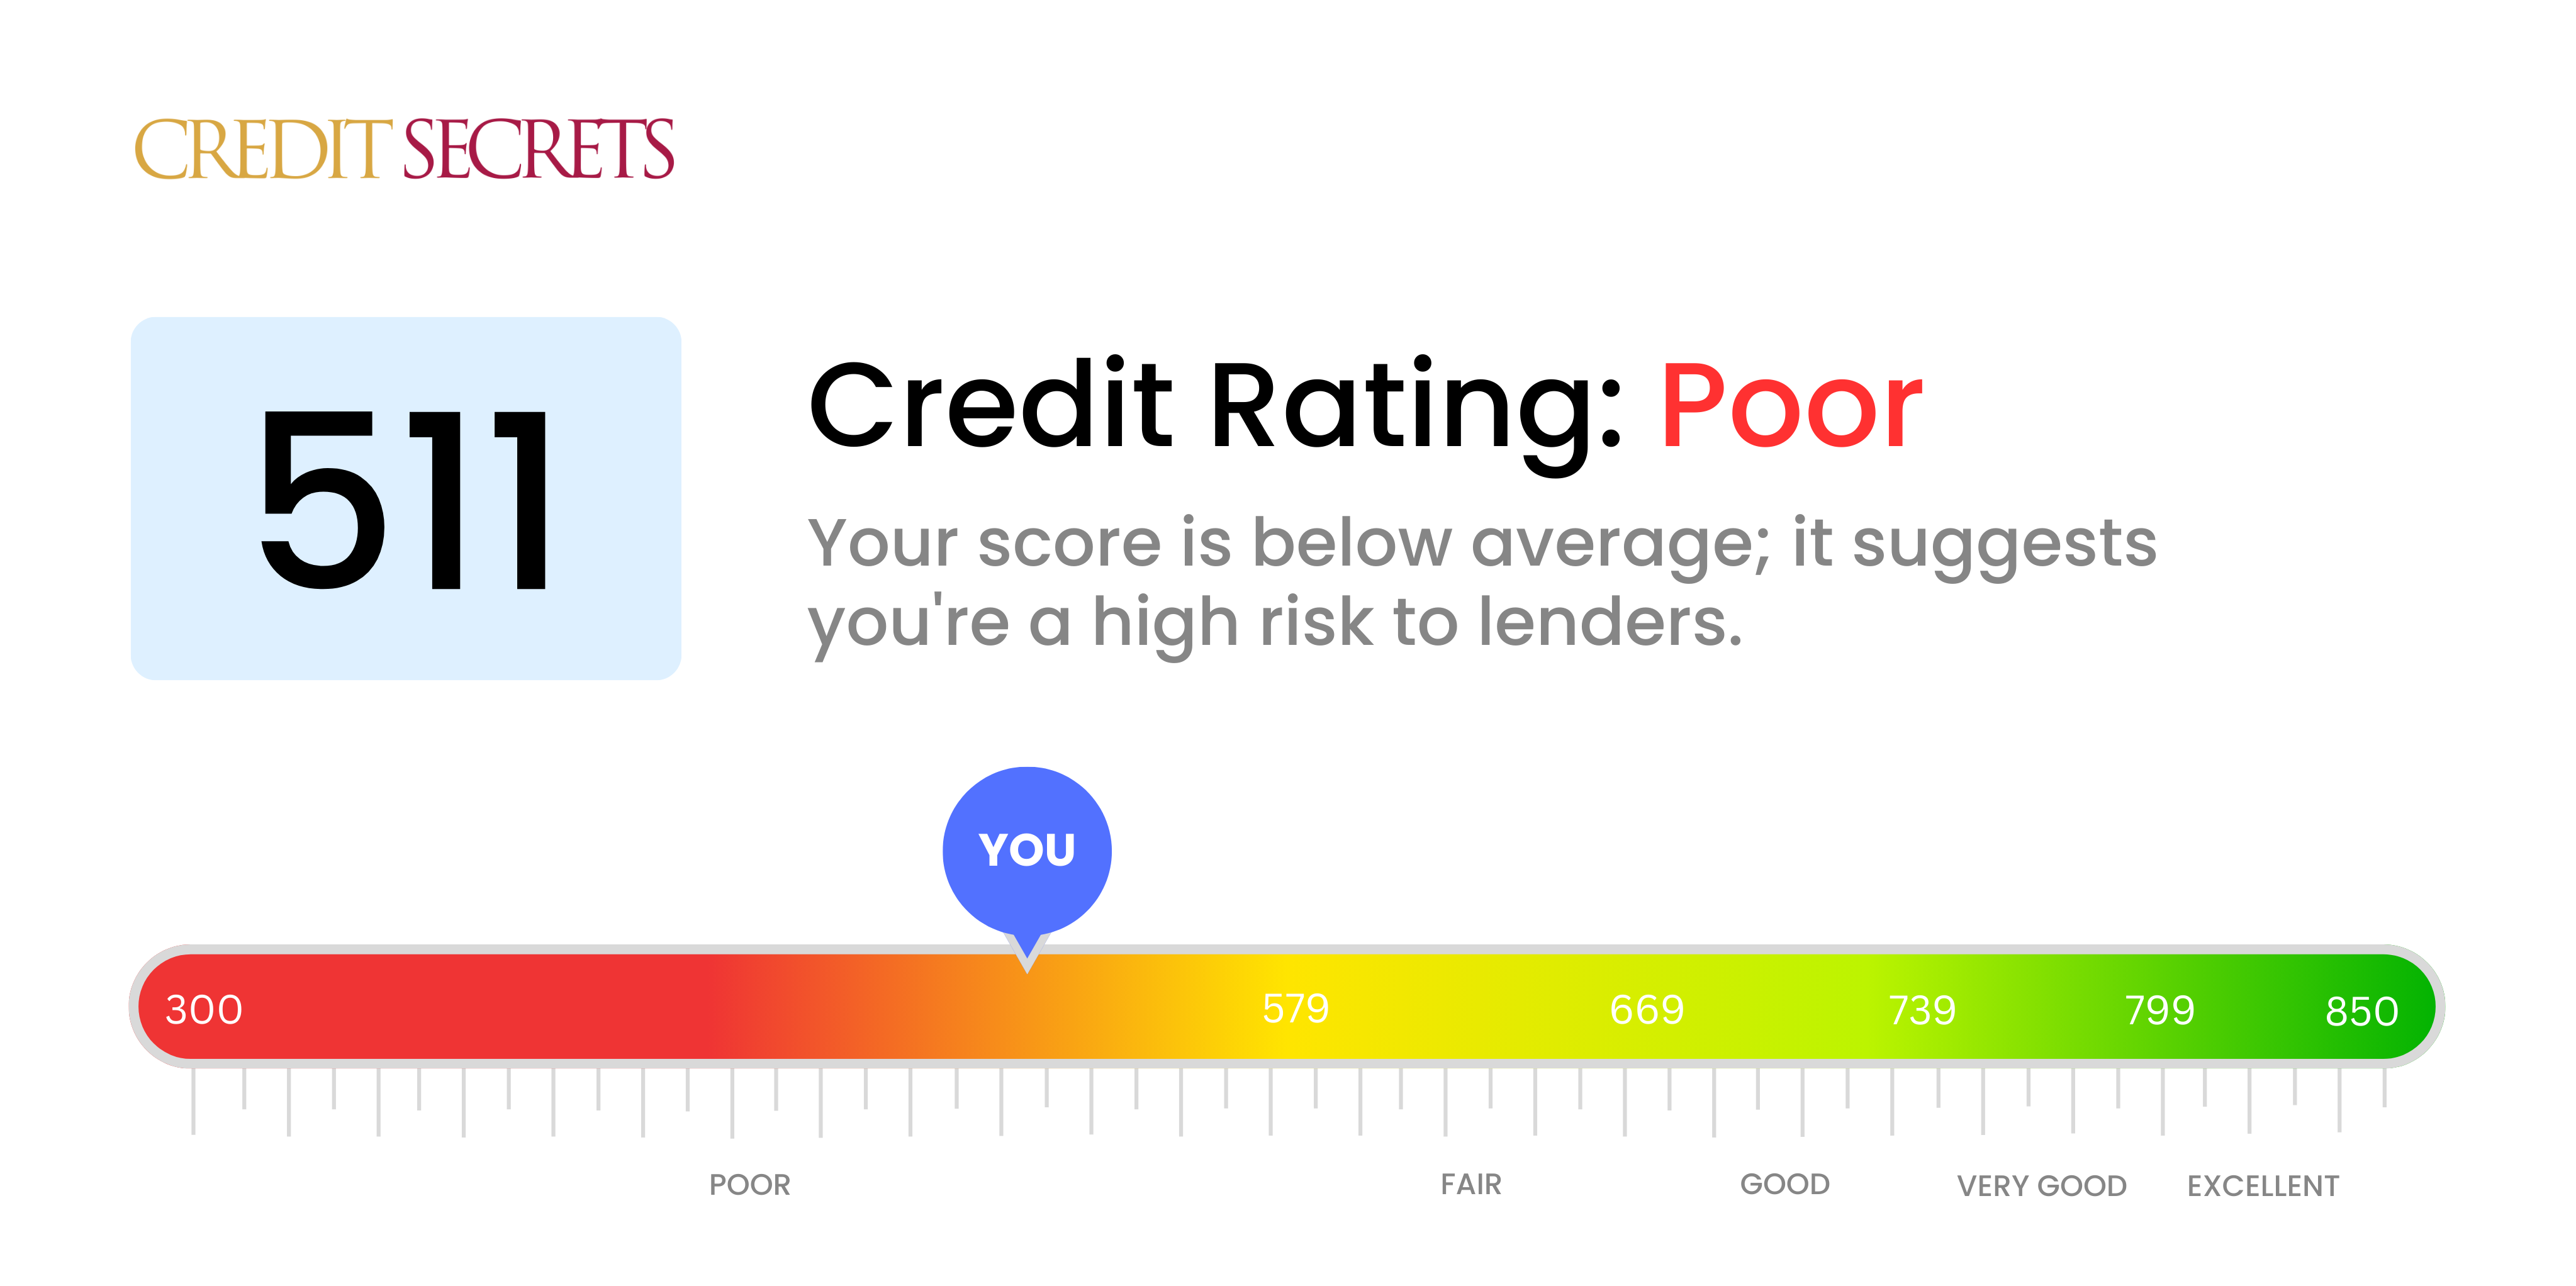 Is 511 a good credit score?